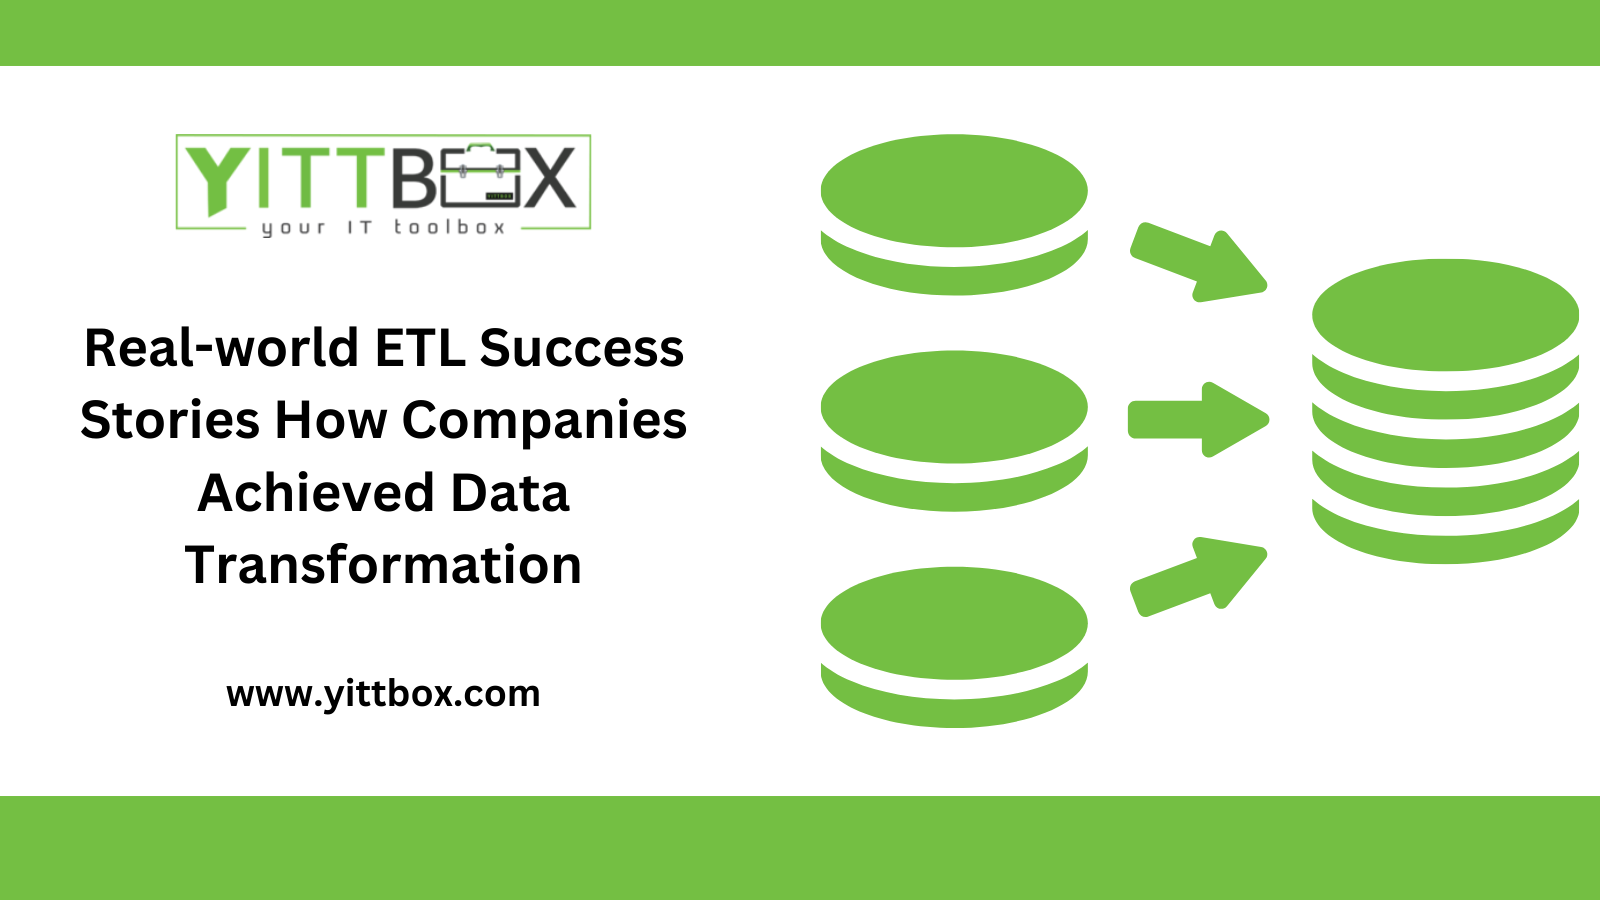 Real-world ETL Success Stories: How Companies Achieved Data Transformation